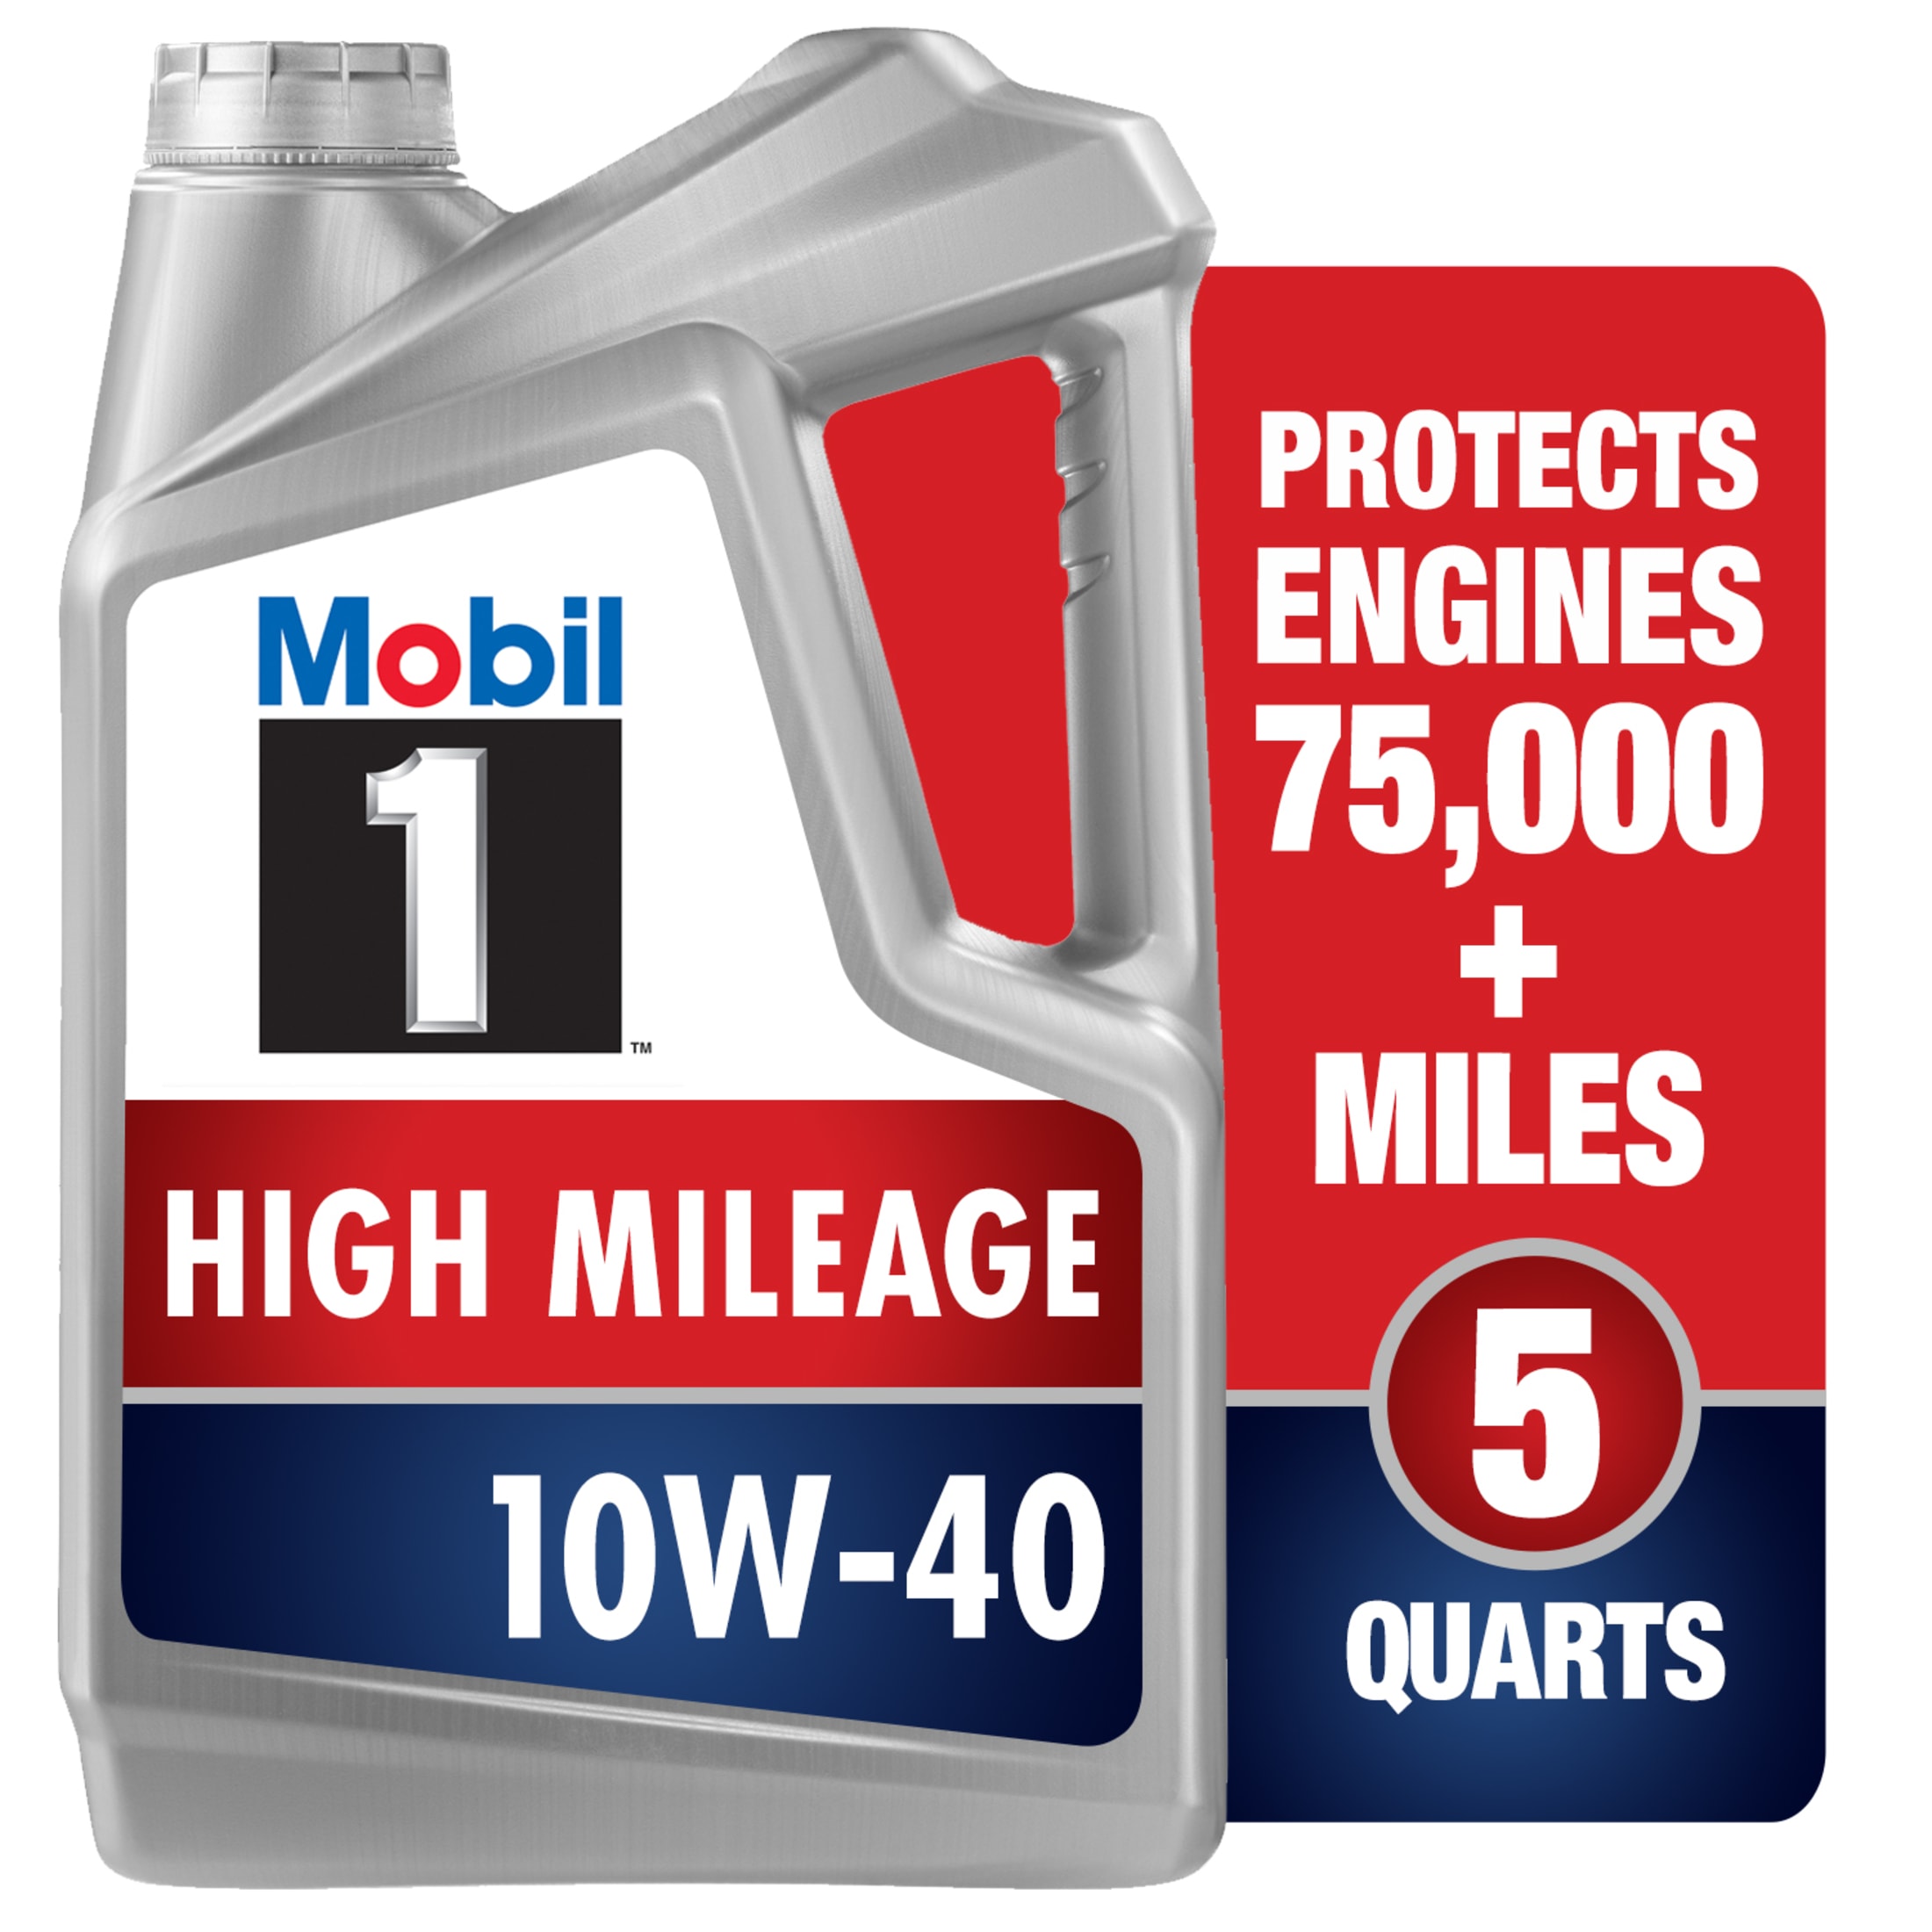 Mobil 1 High Mileage Full Synthetic Motor Oil 10W-40, 5 Quart - image 3 of 9